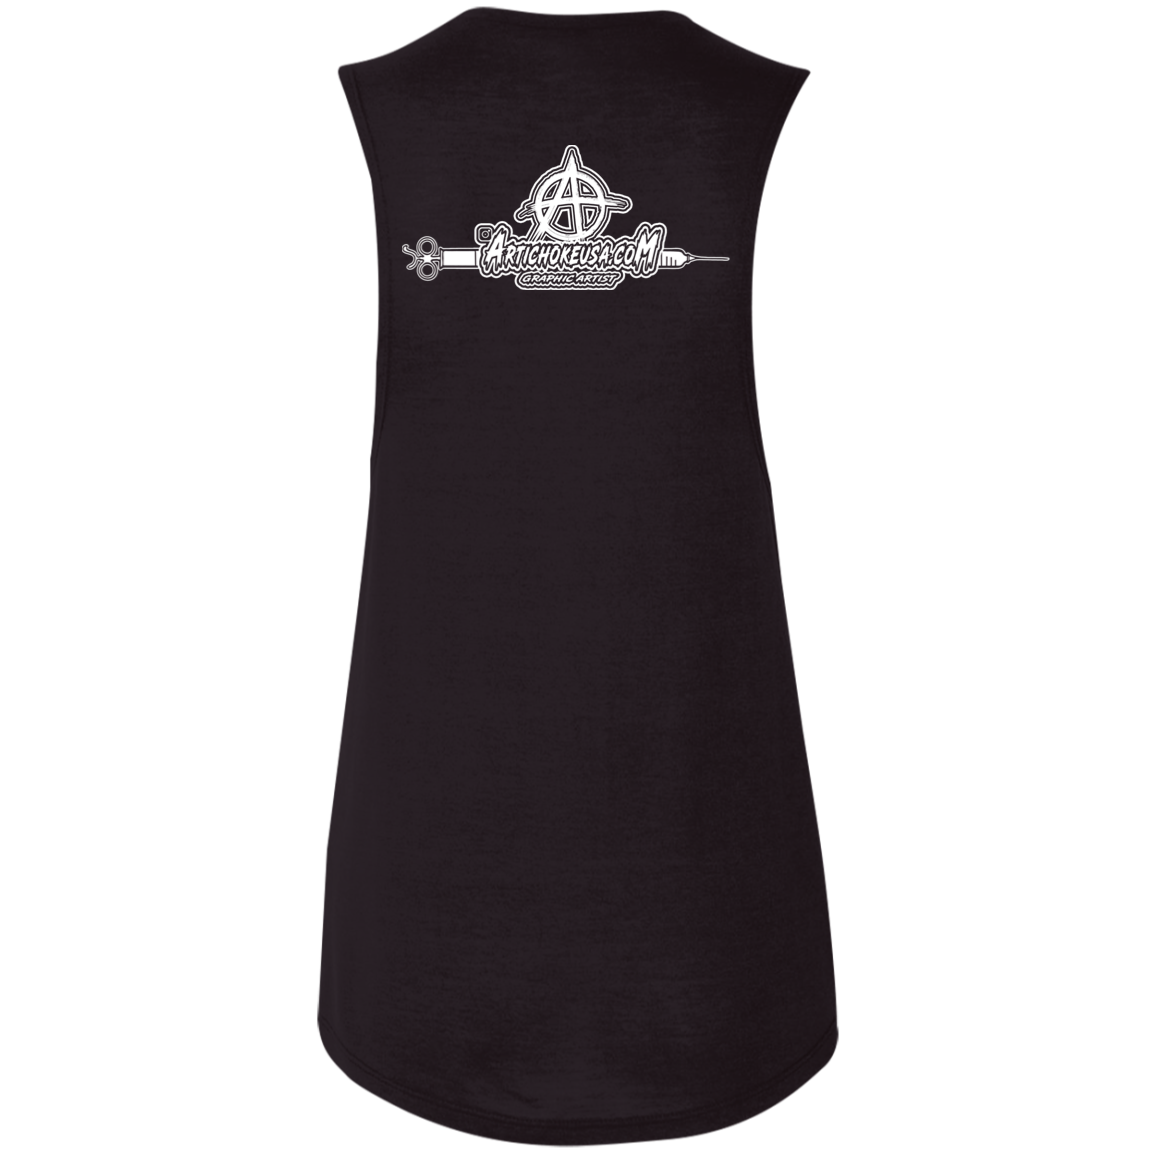 ArtichokeUSA Custom Design. Vaccinated AF (and fine). Ladies' Flowy Muscle Tank